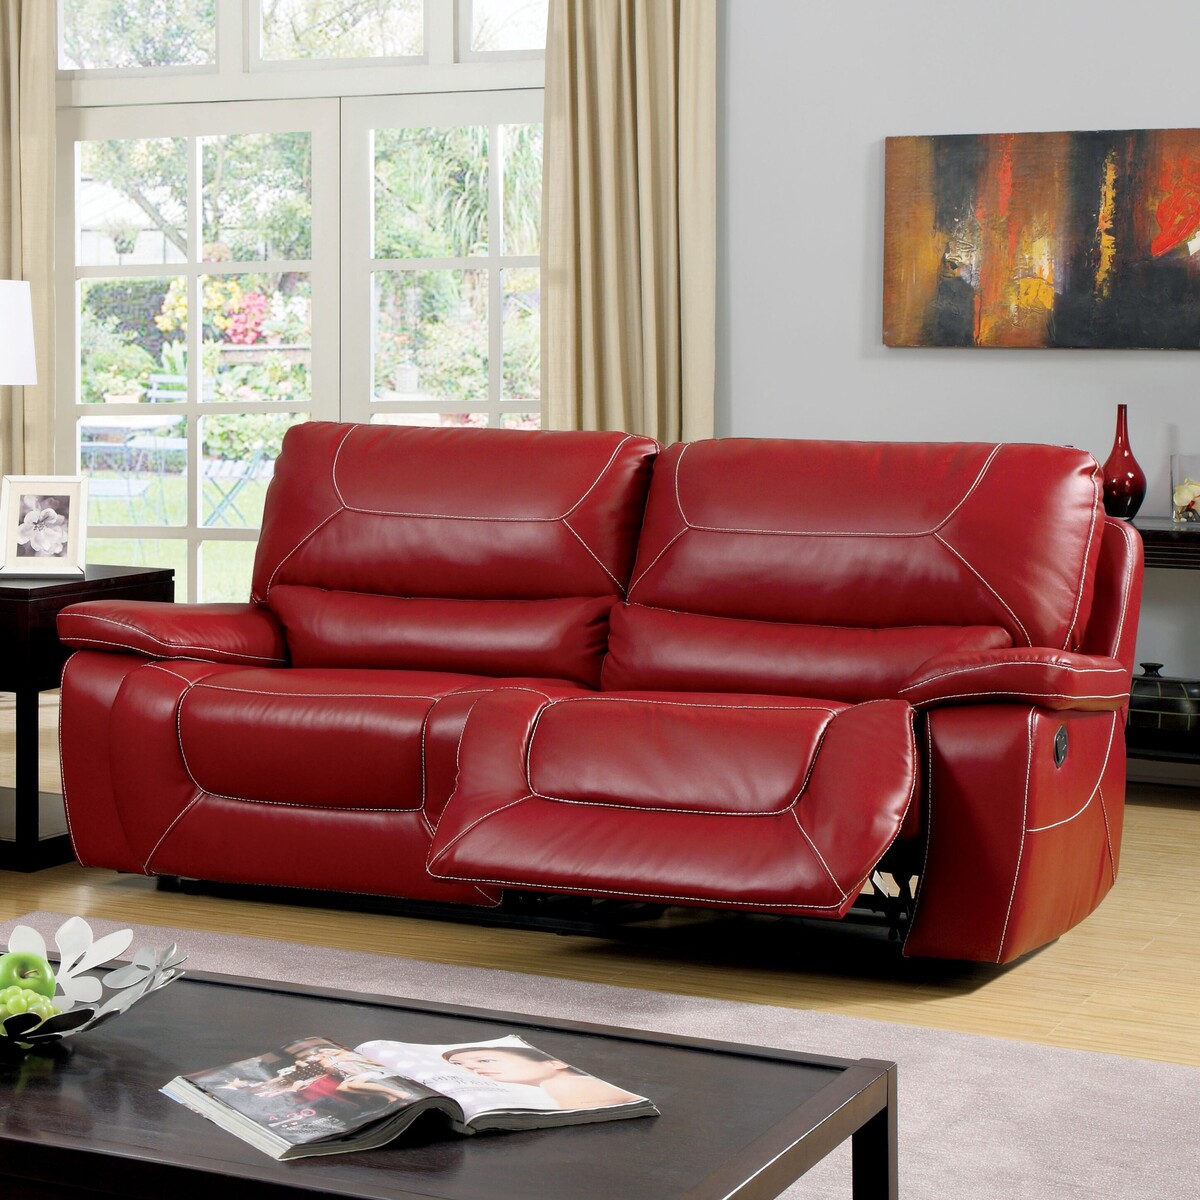 How To Make A Recliner Sofa Look Good